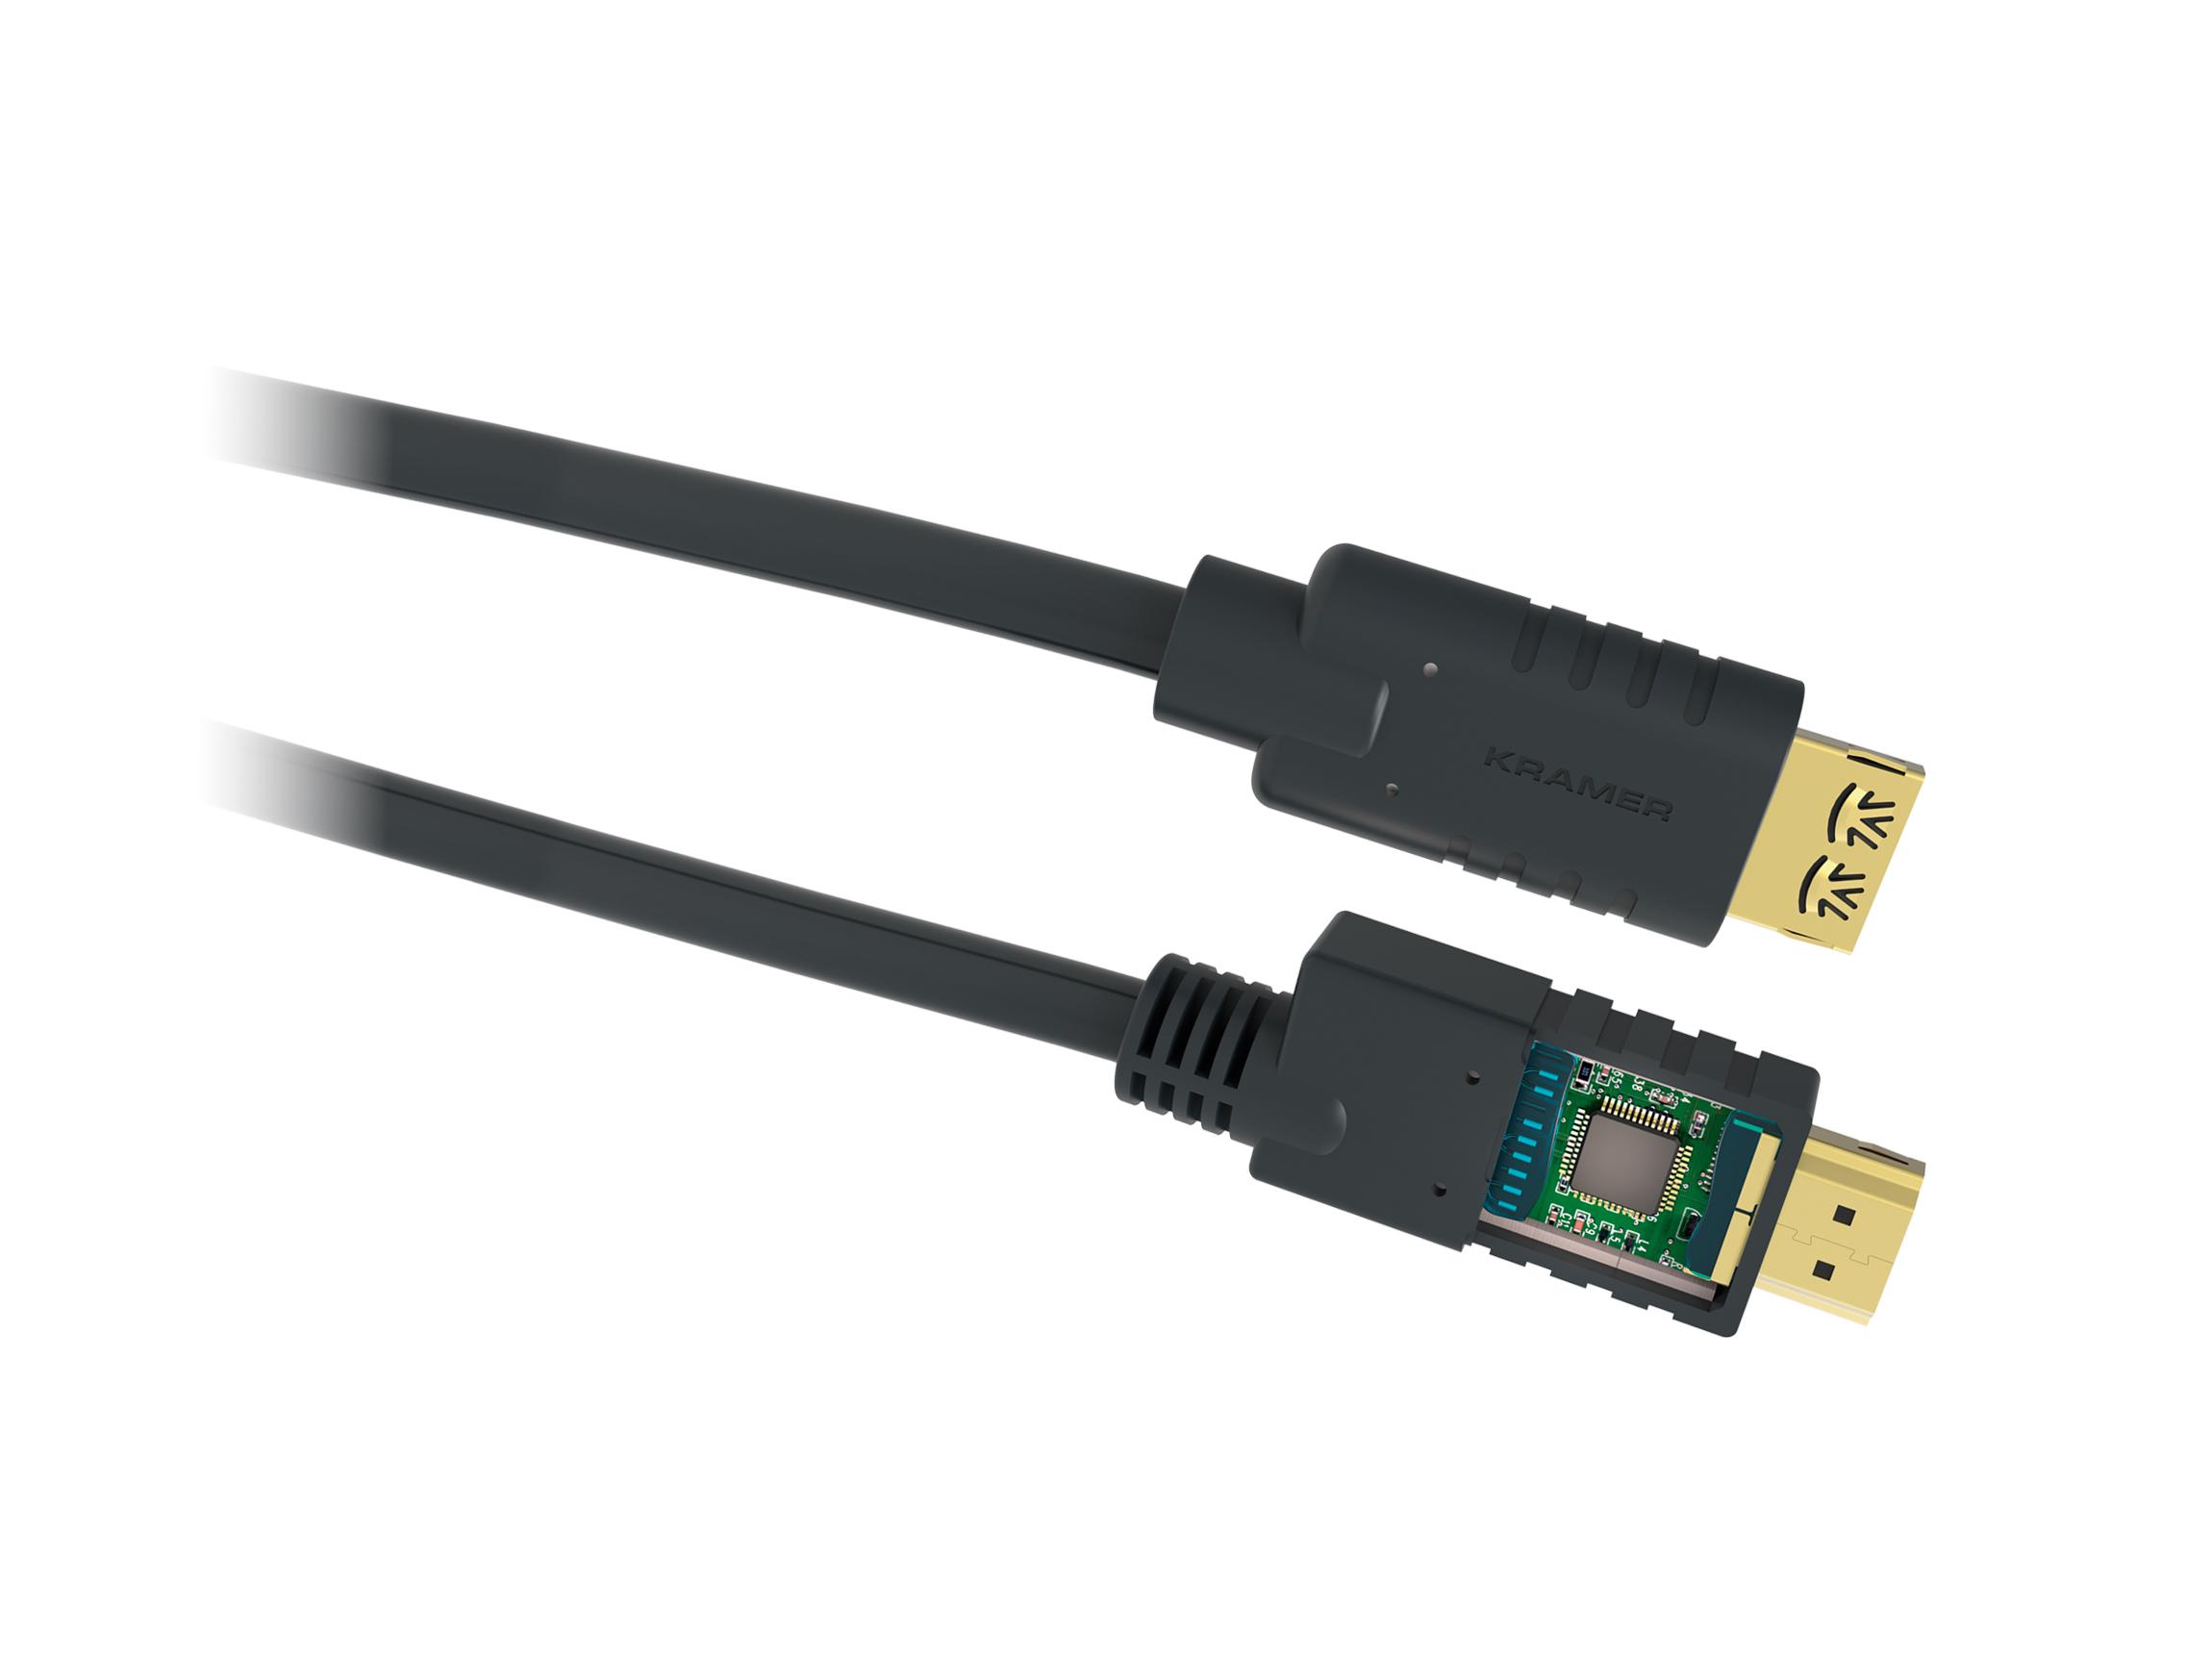 CA-HM-35 Active High Speed HDMI Cable with Ethernet - 35ft by Kramer